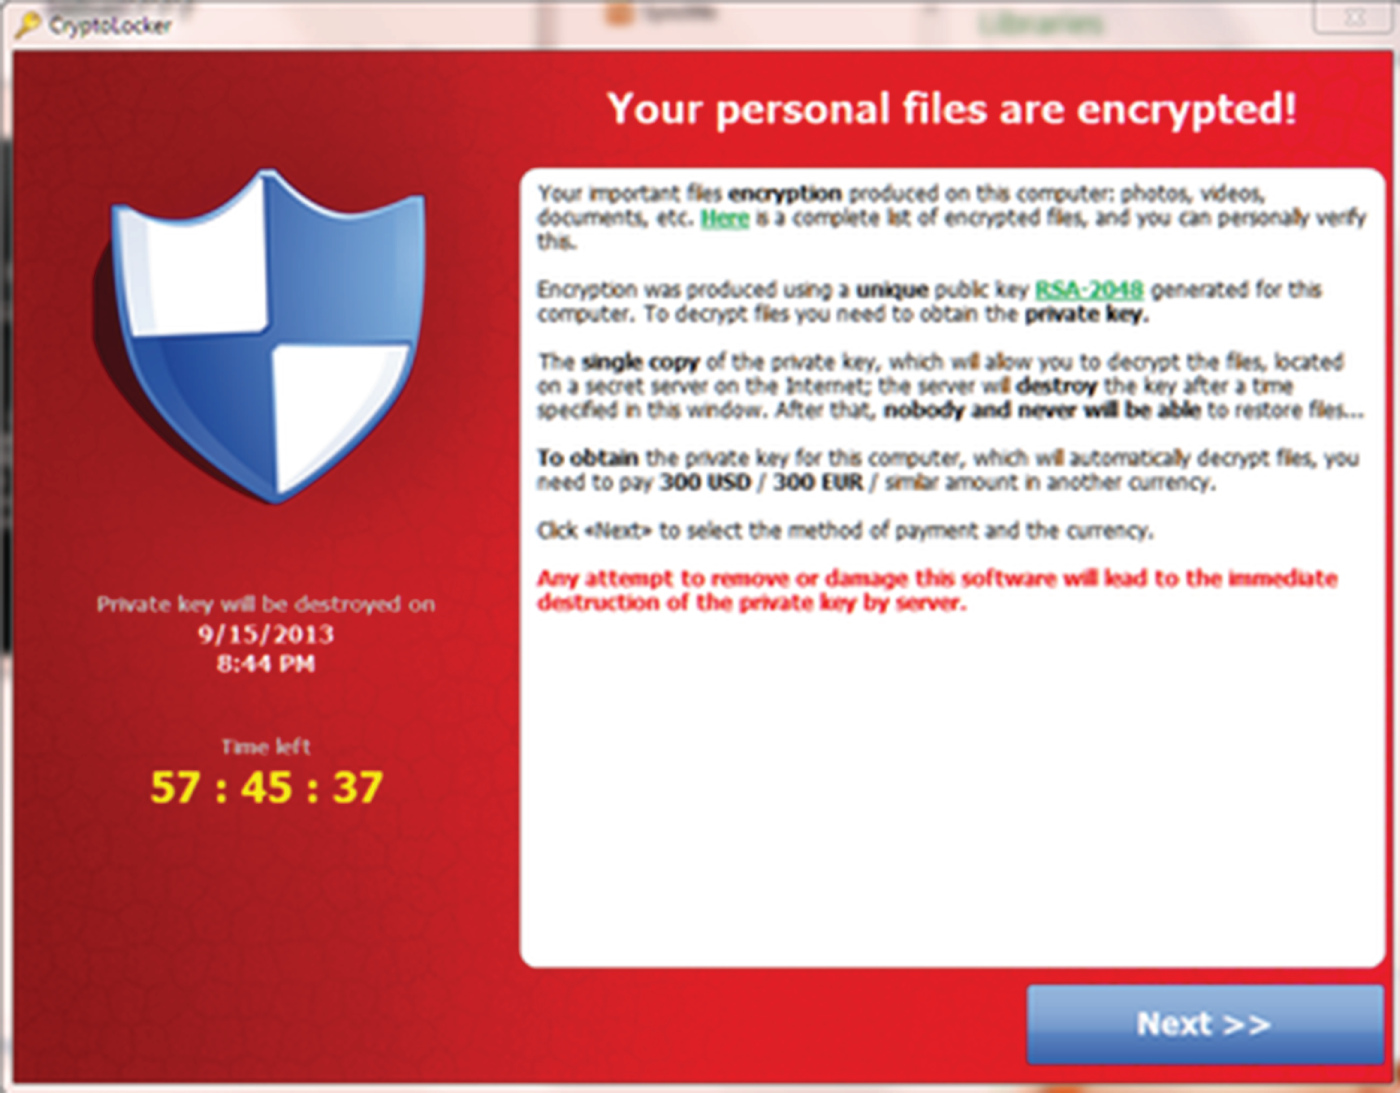 Snapshot of the CryptoLocker window showing that the personal files are encrypted.